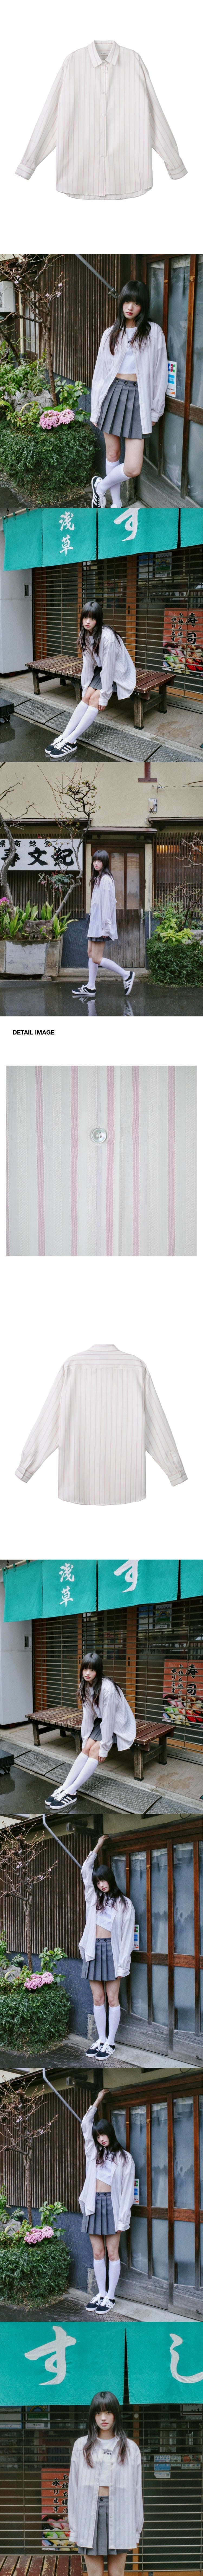 OVERFITTED PINK STRIPE SHIRTS